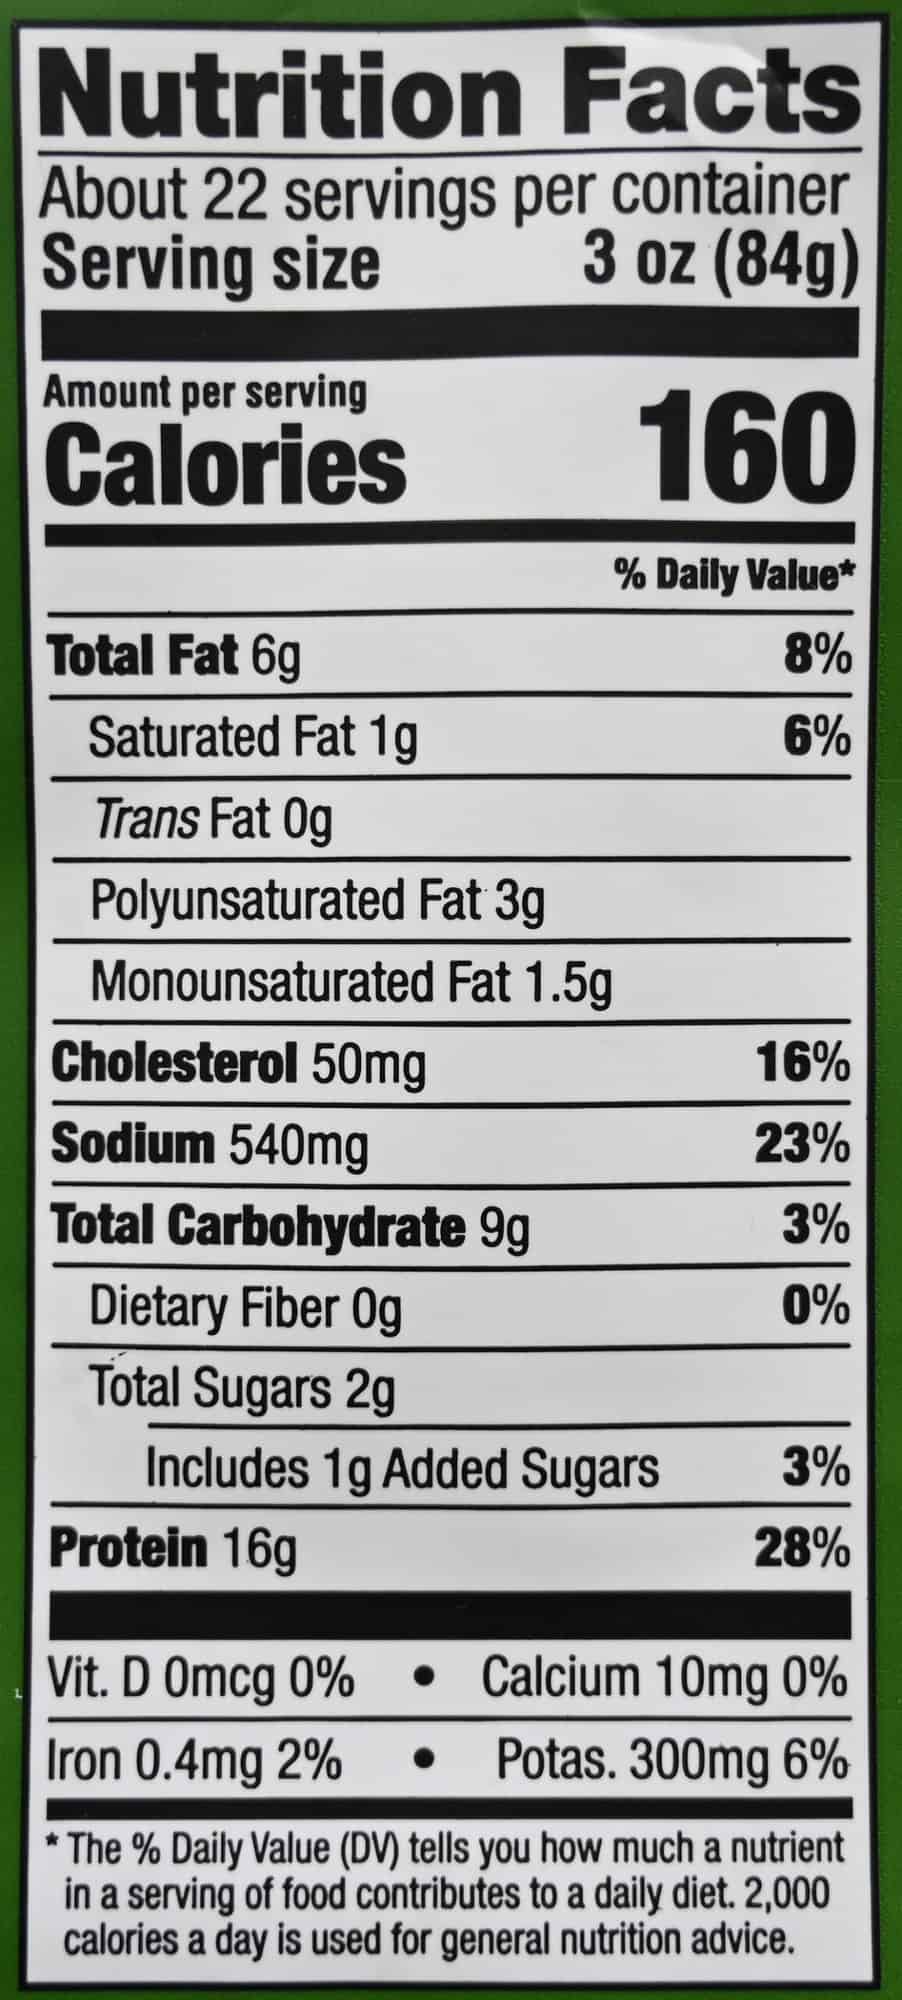 Image of the nutrition facts for the chicken breast chunks from the back of the bag,